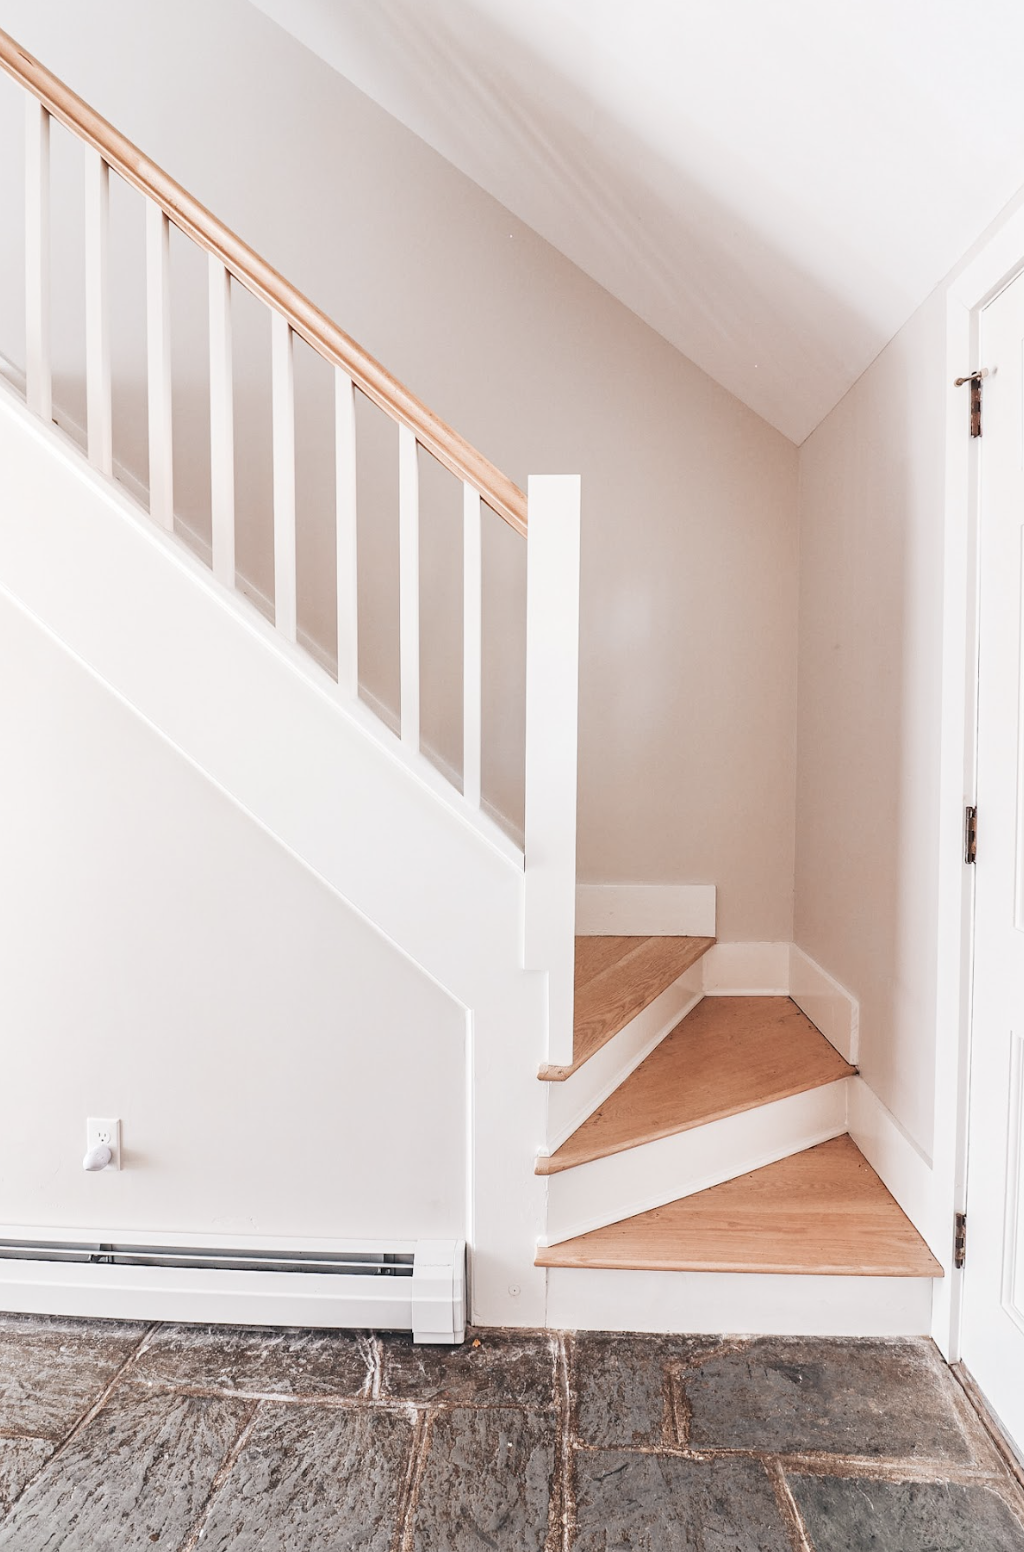 Remodeled stairs by Centerline Design